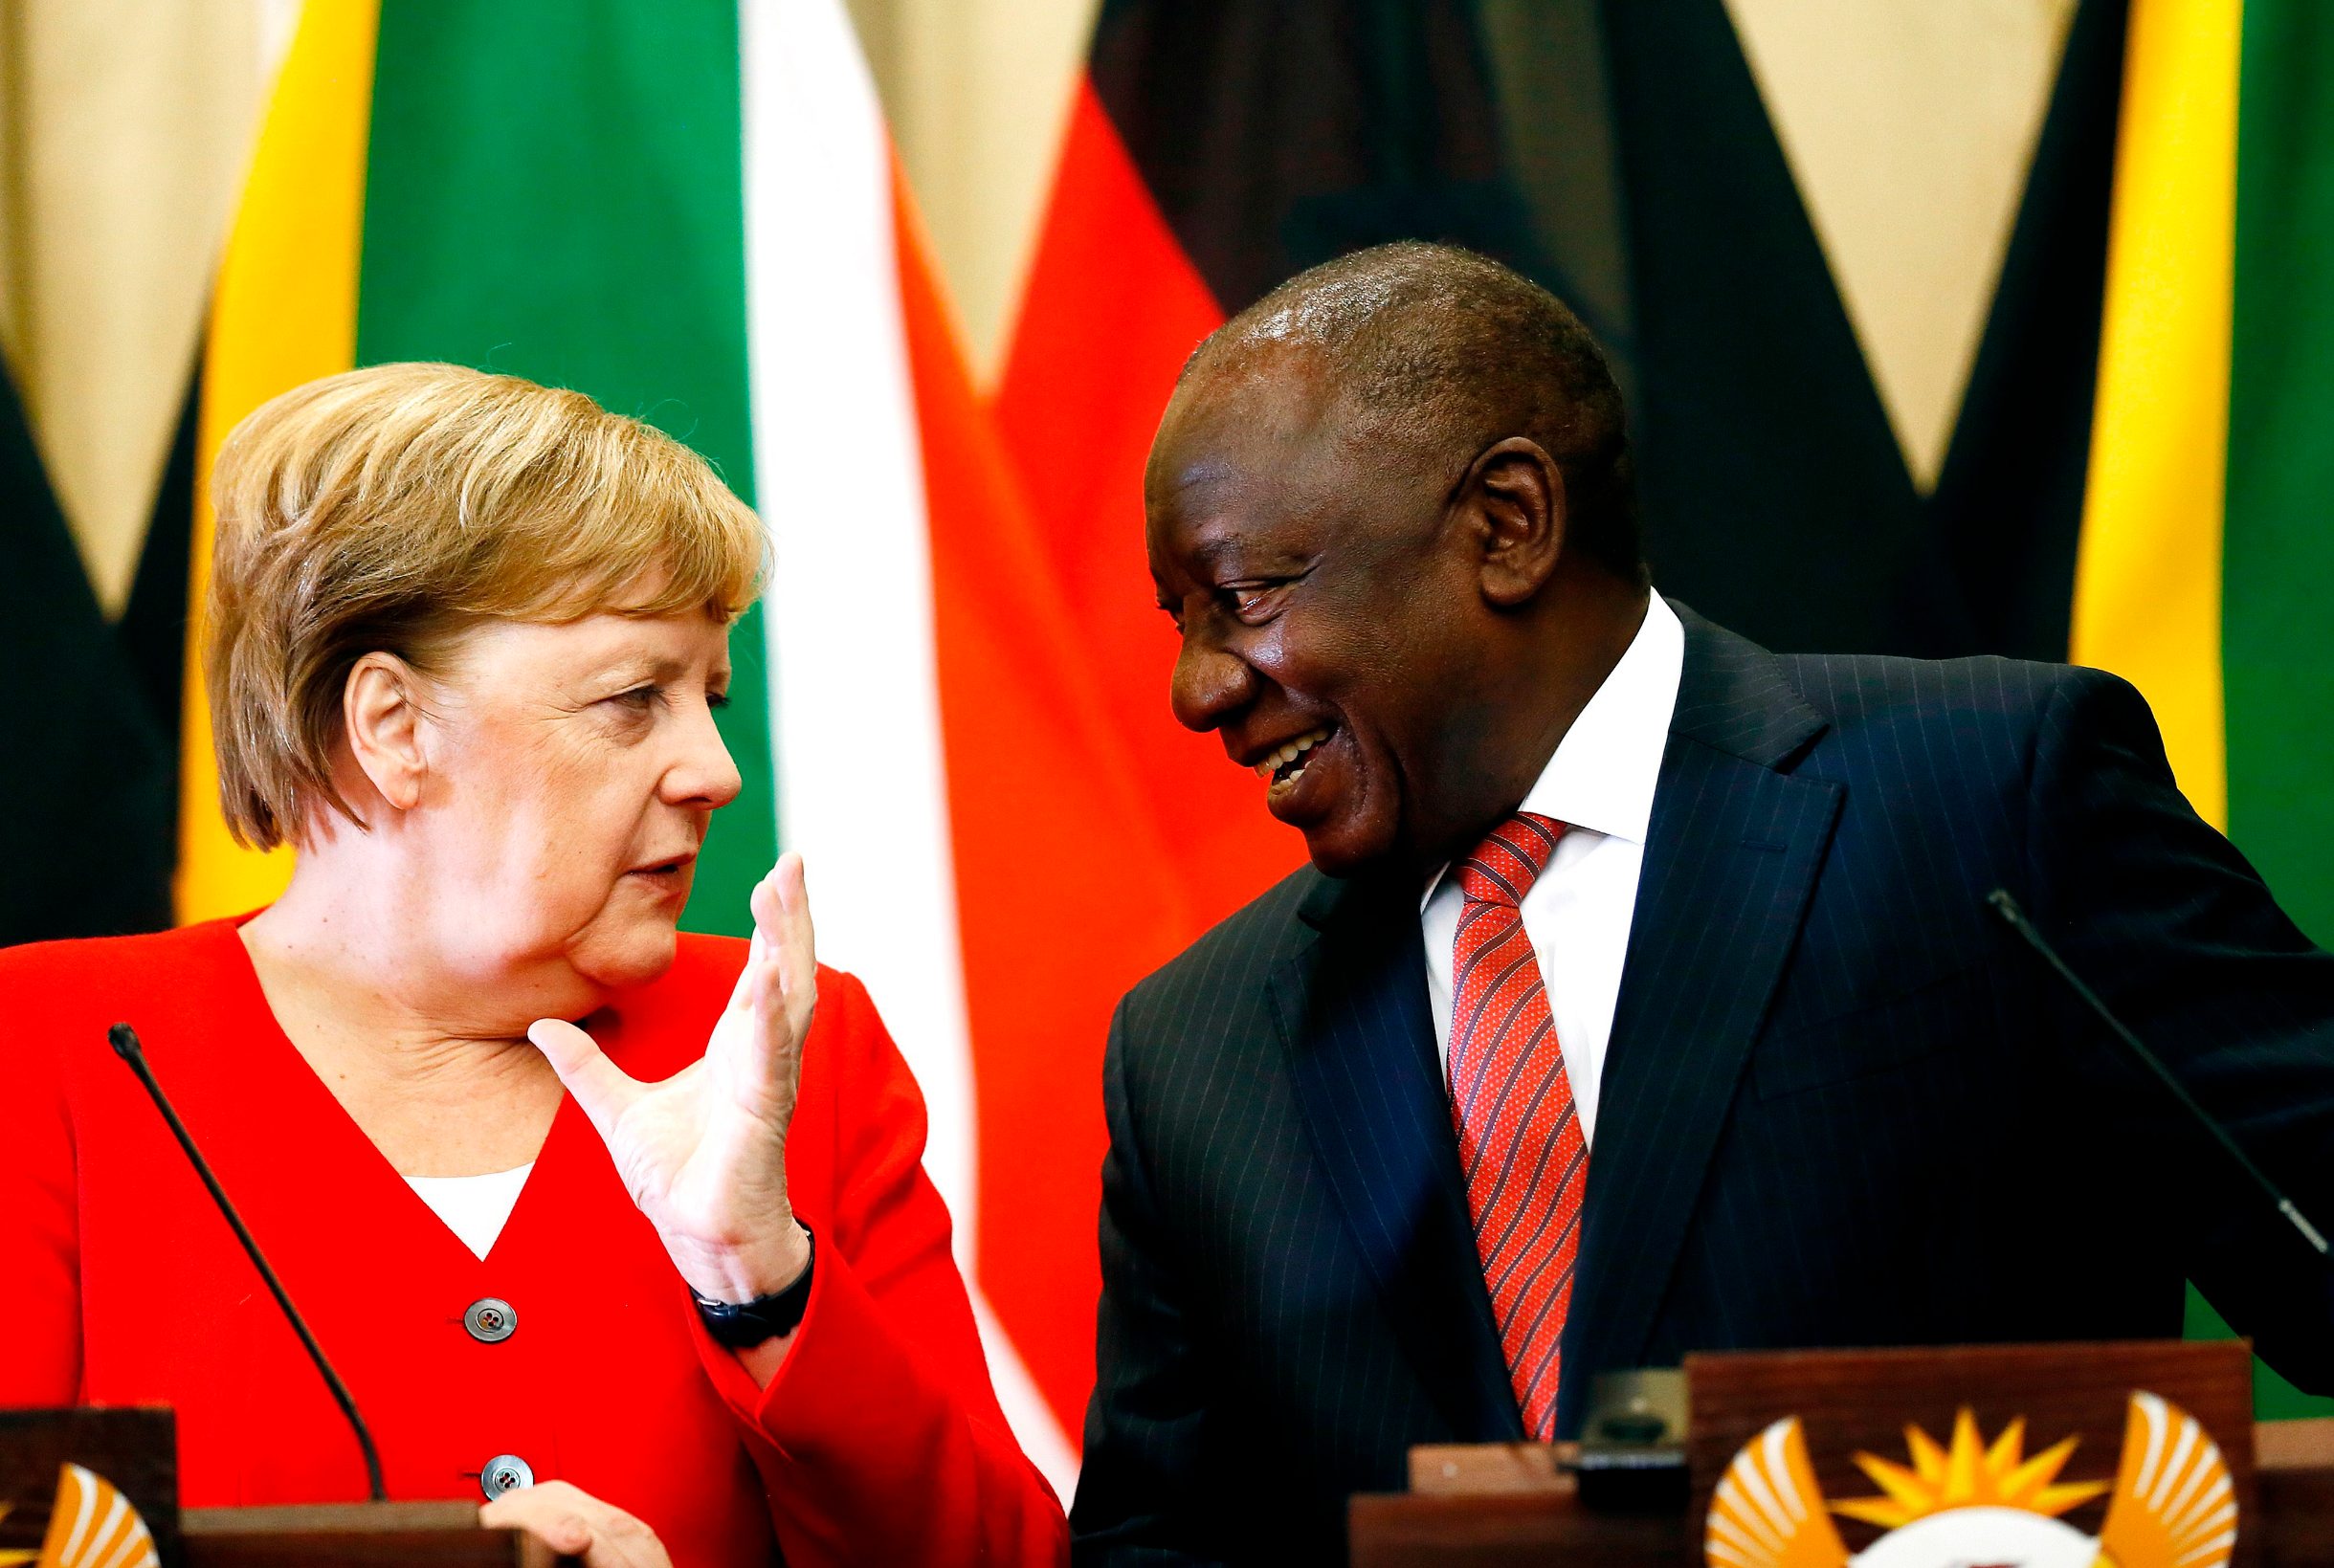 Angela Merkel (L), Chancellor of Germany, and Cyril Ramaphosa (R), the President of South Africa, conduct a joint press conference during her official visit at the Union Buildings in Pretoria on February 6, 2020. (Photo by Phill Magakoe / AFP)